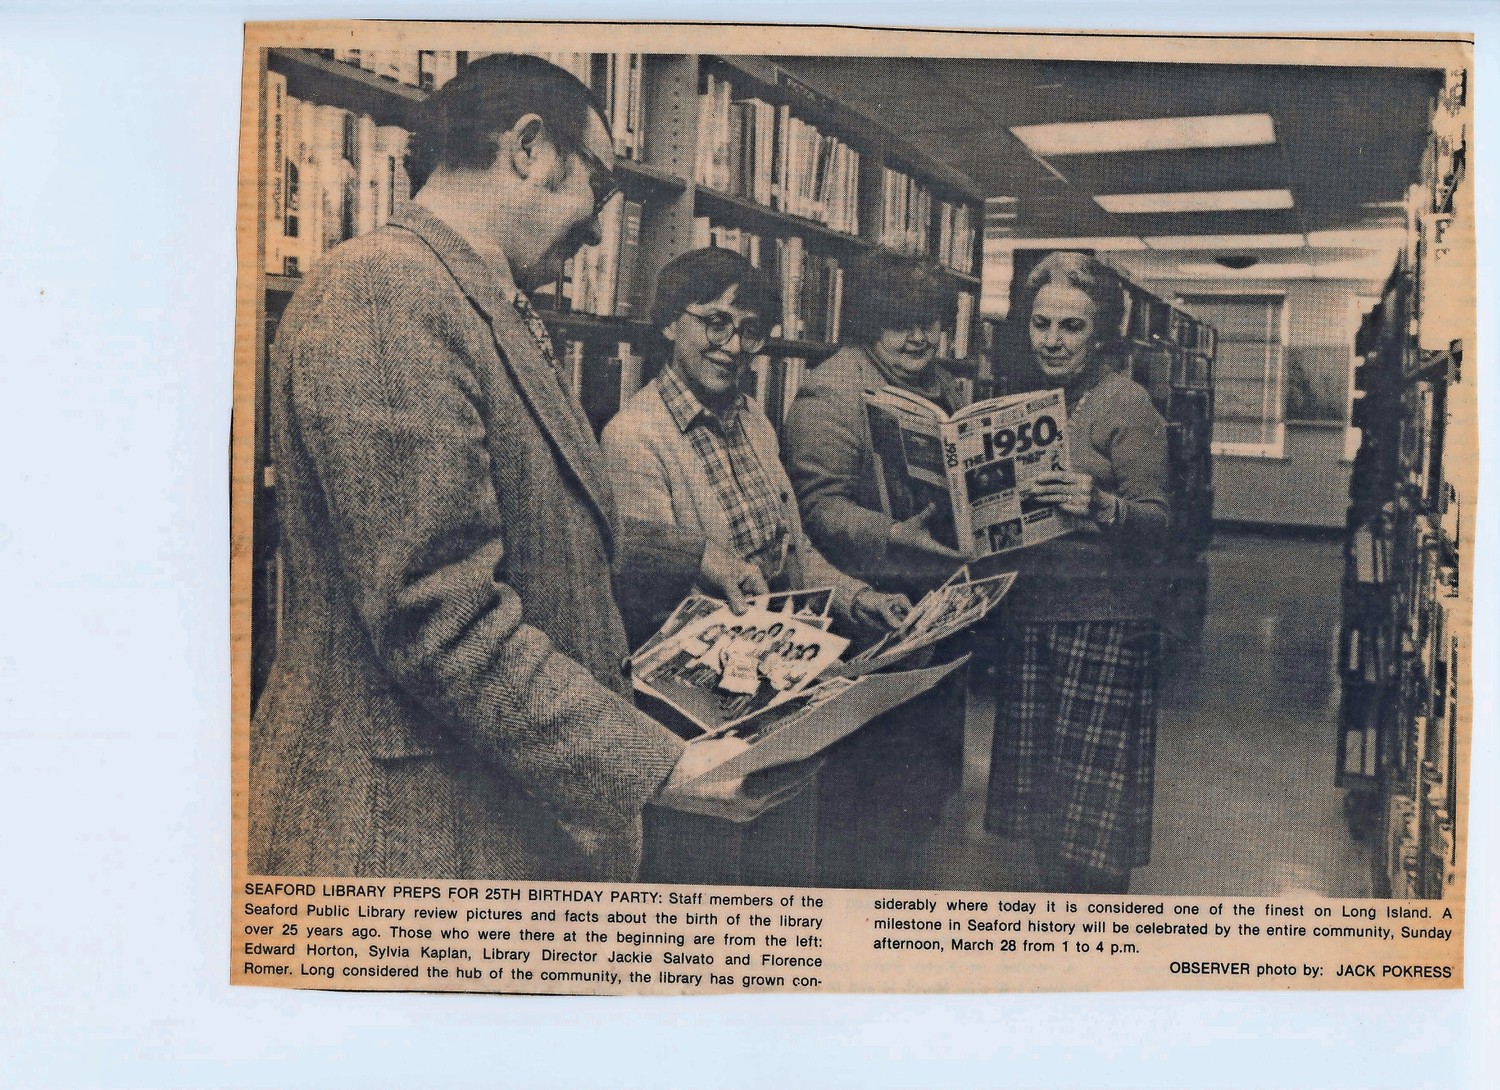 Edward Horton, Sylvia Kaplan, former Library Director Jacqueline Salvato and Florence Romer reviewed photos and facts about the library before its 25th birthday party.